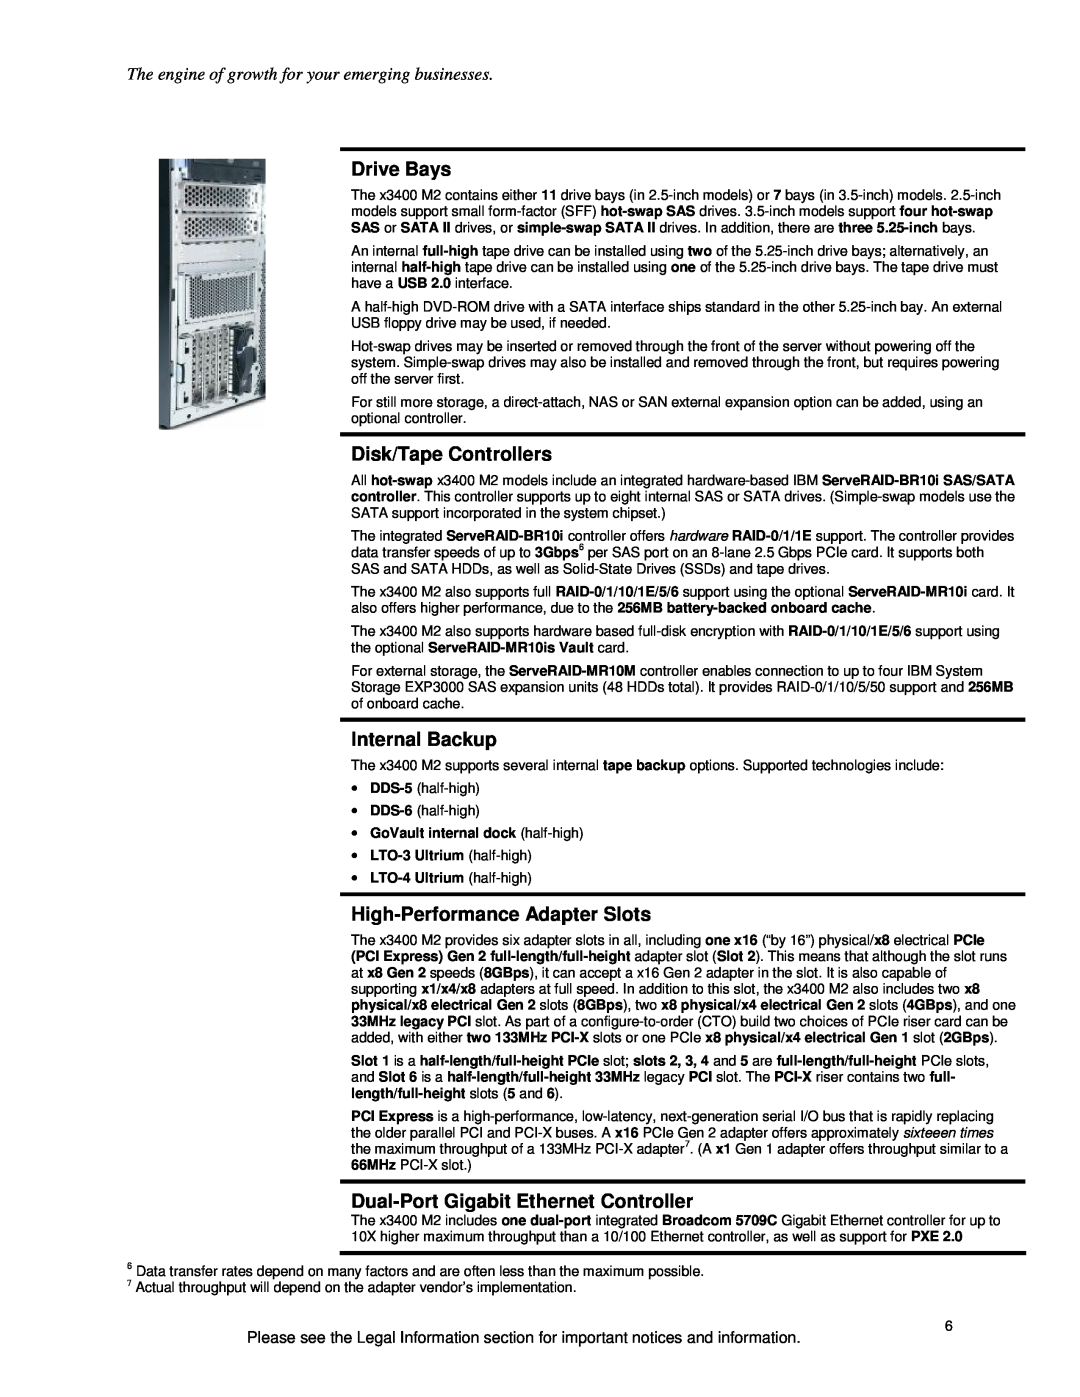 IBM X3400 M2 specifications Drive Bays, Disk/Tape Controllers, Internal Backup, High-Performance Adapter Slots 